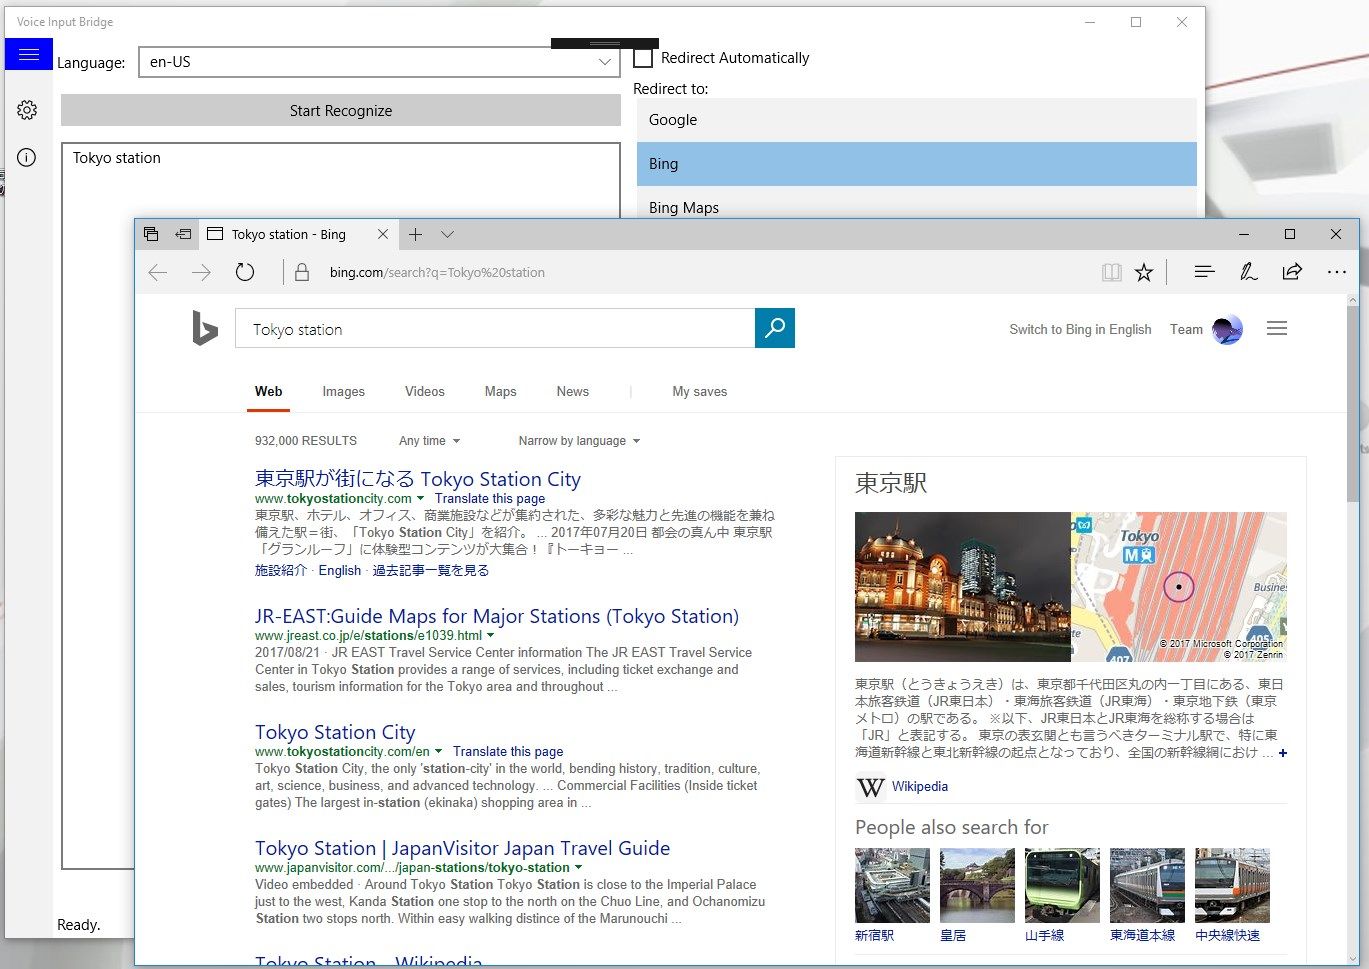 For example, if you pass "tokyo station" to Bing, search results on Tokyo station will be displayed.